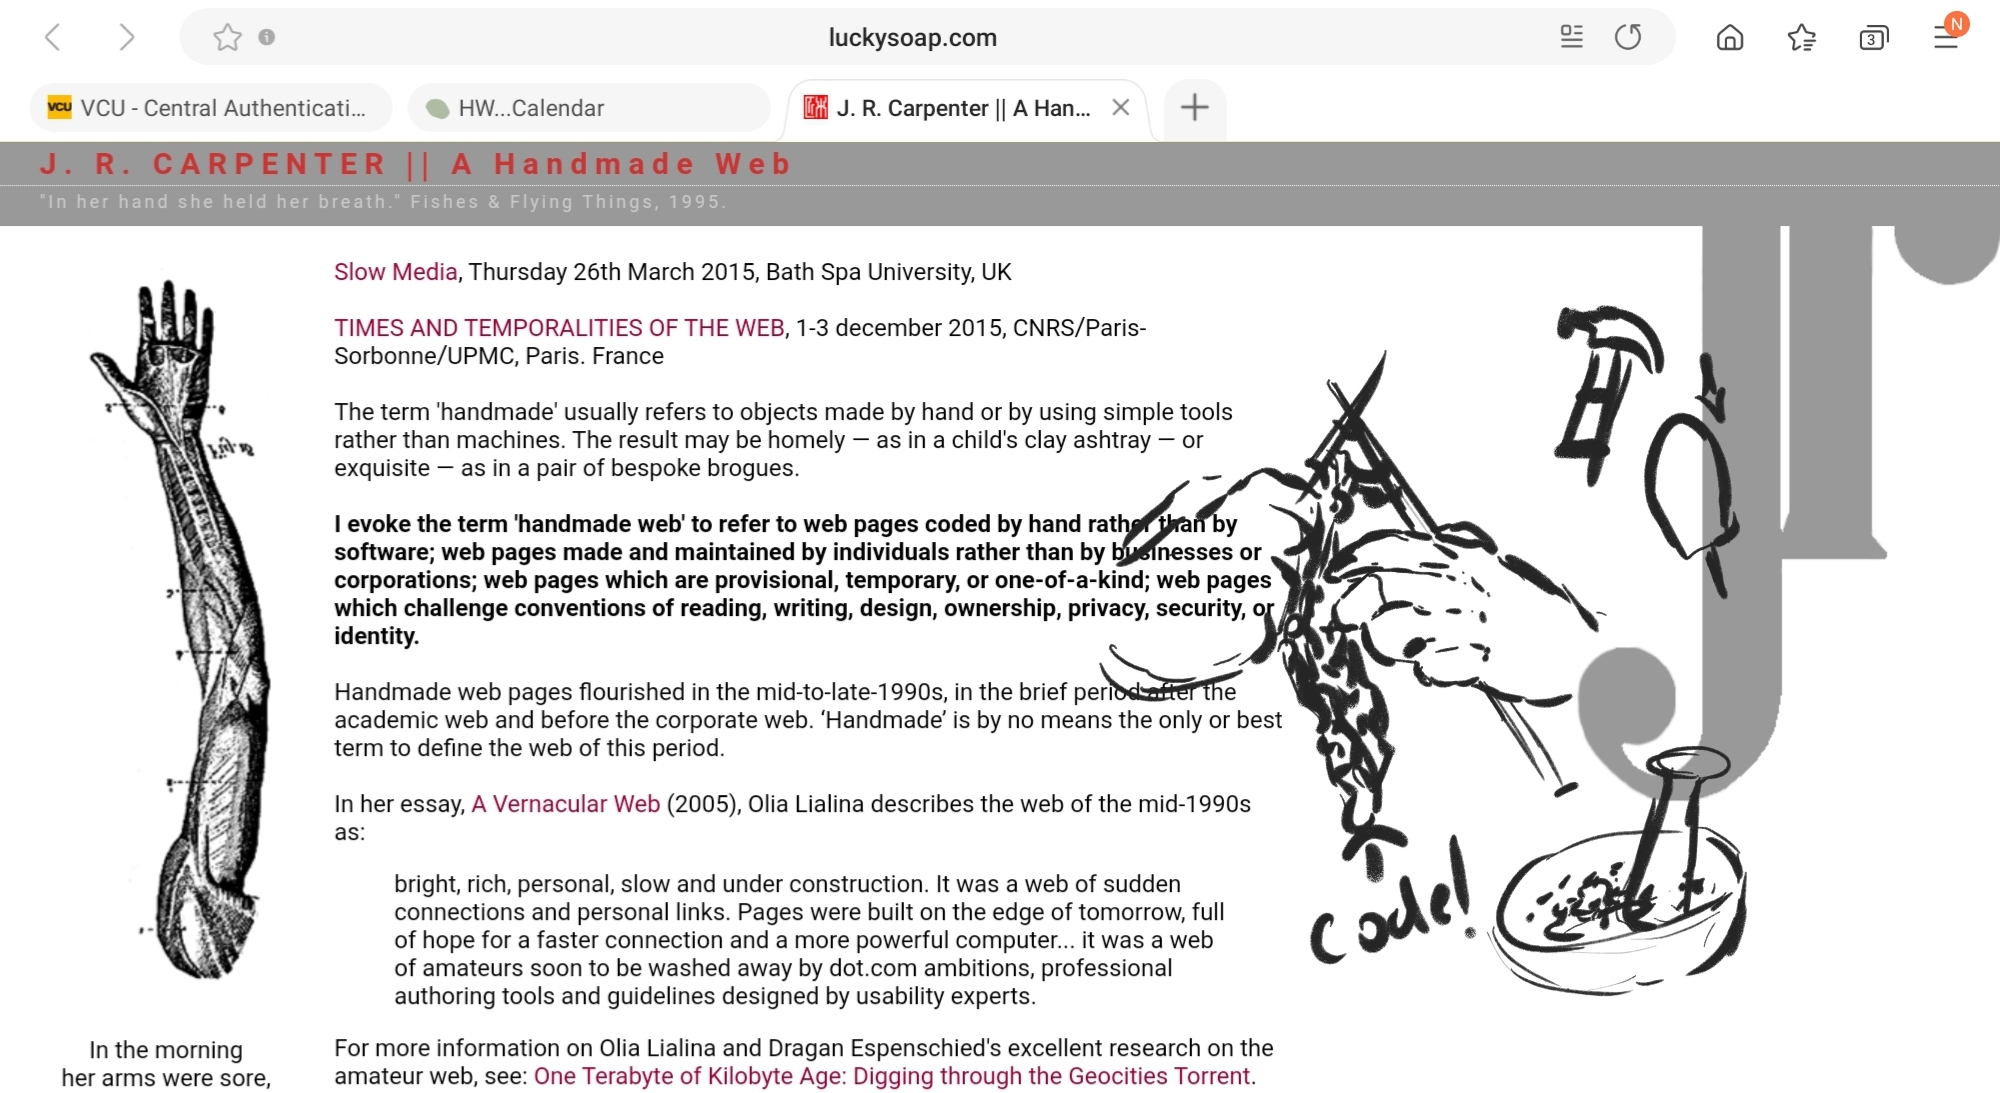 screenshot of the reading with some hands knitting and other doddles